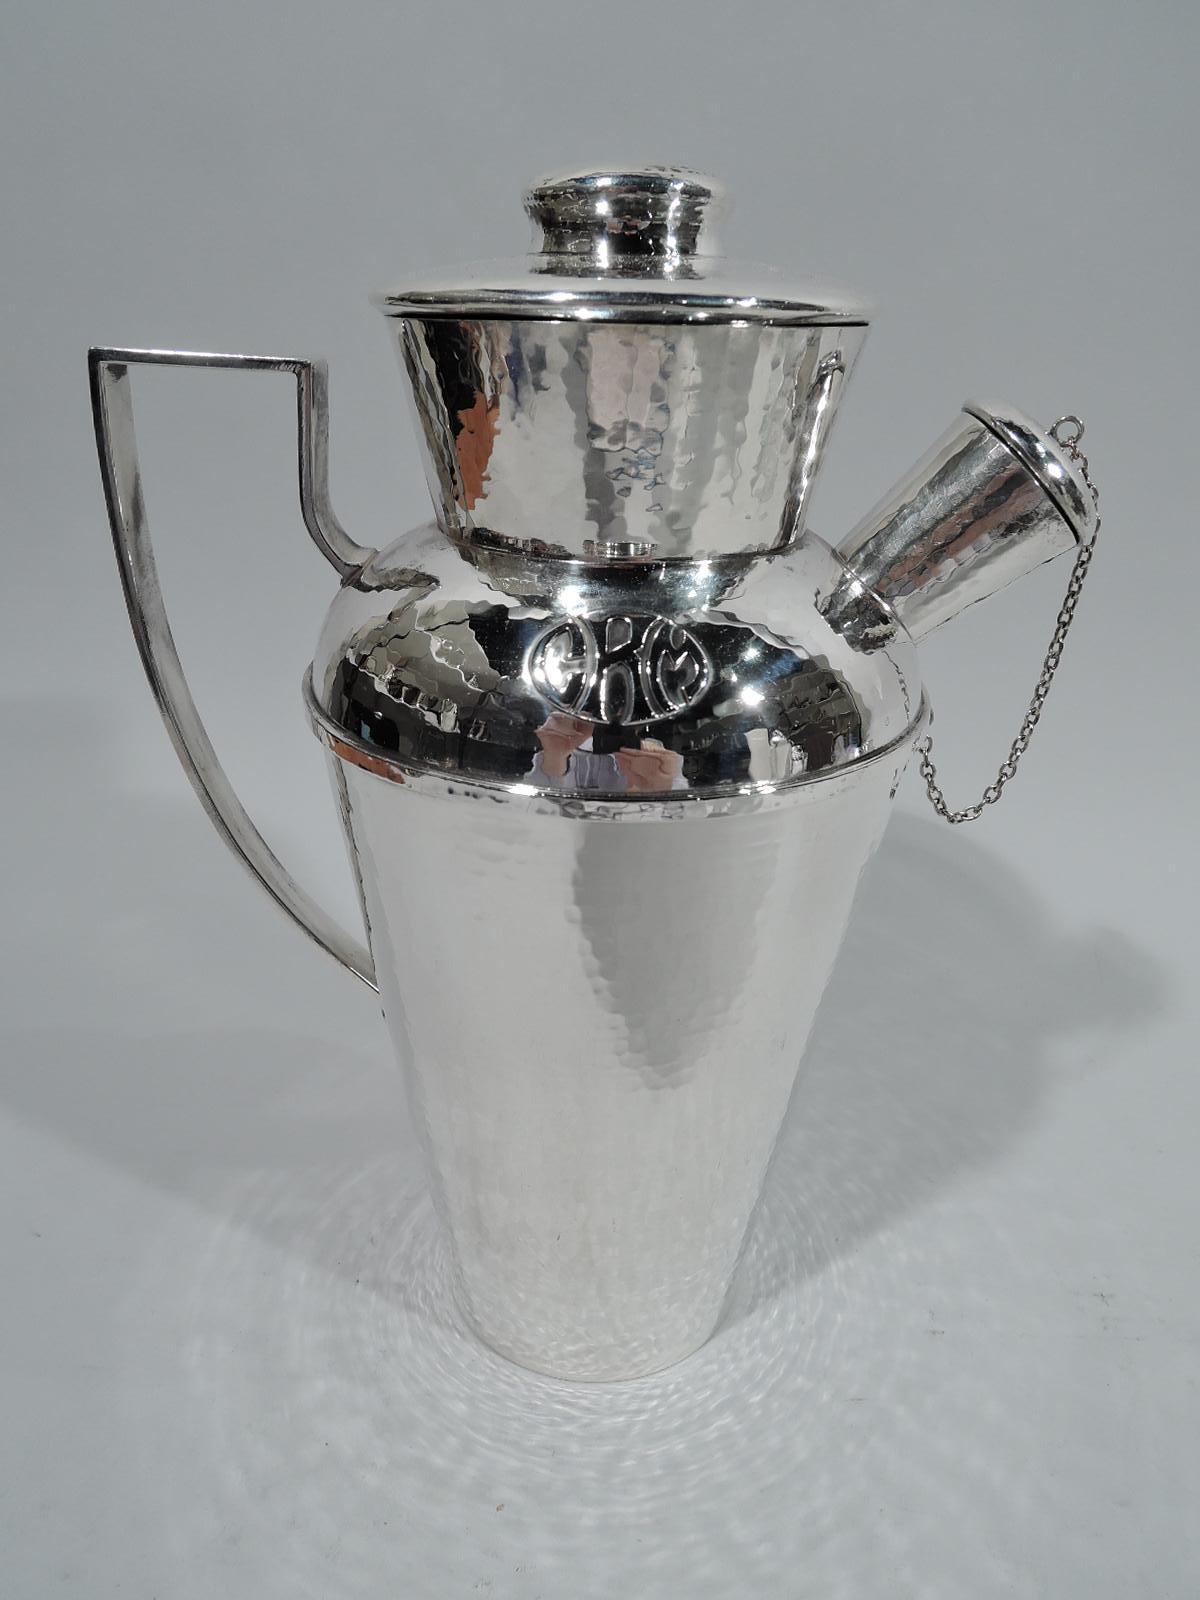 Craftsman sterling silver cocktail shaker. Made by Lebolt in Chicago, circa 1920. Tapering and wide-bodied bowl and neck, and stubby spout with chained and cork-lined cap. Cover flat and cork-lined with button finial. High-looping scroll handle. All